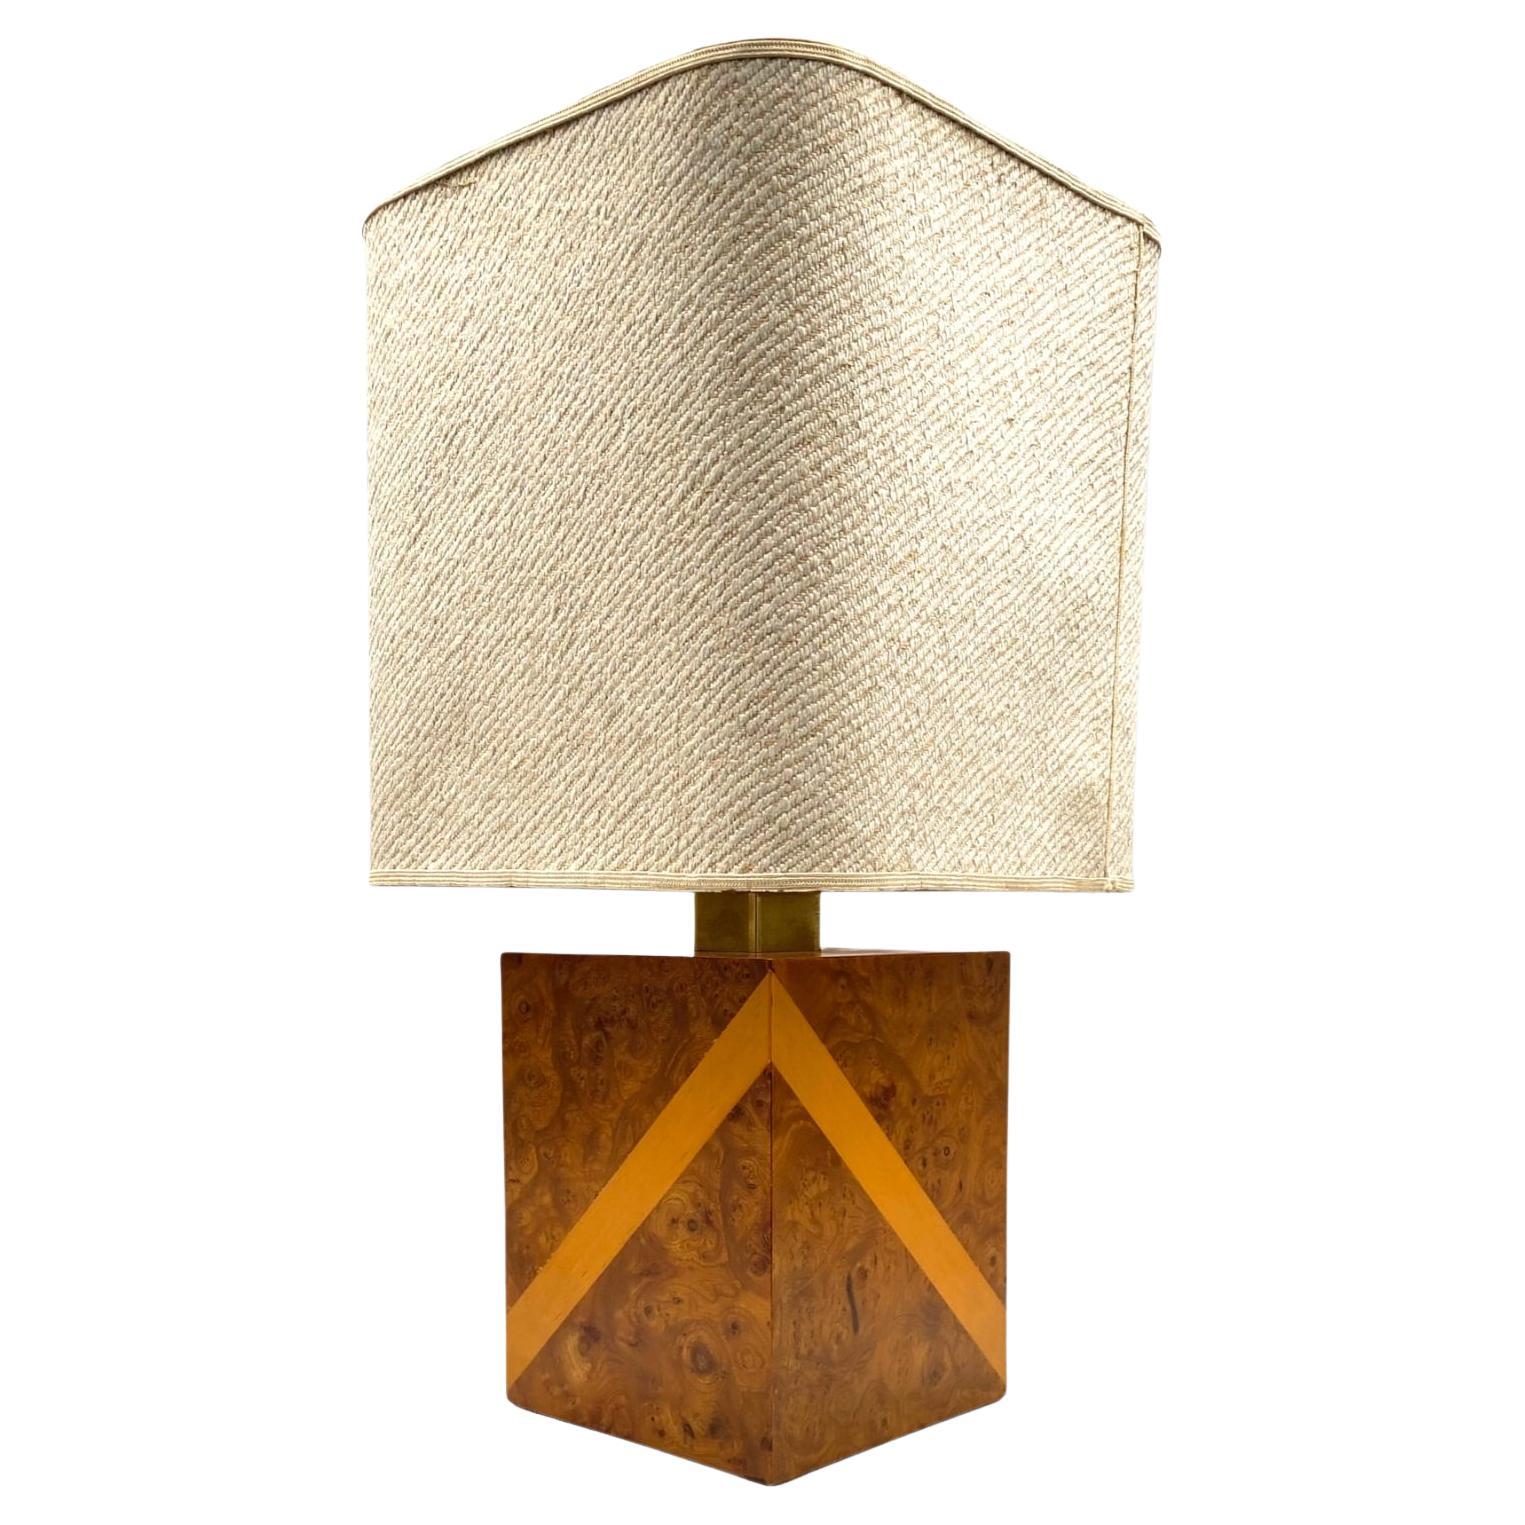 Hollywood Regency Cubic Wood and Brass Table Lamp, Italy, 1970s For Sale